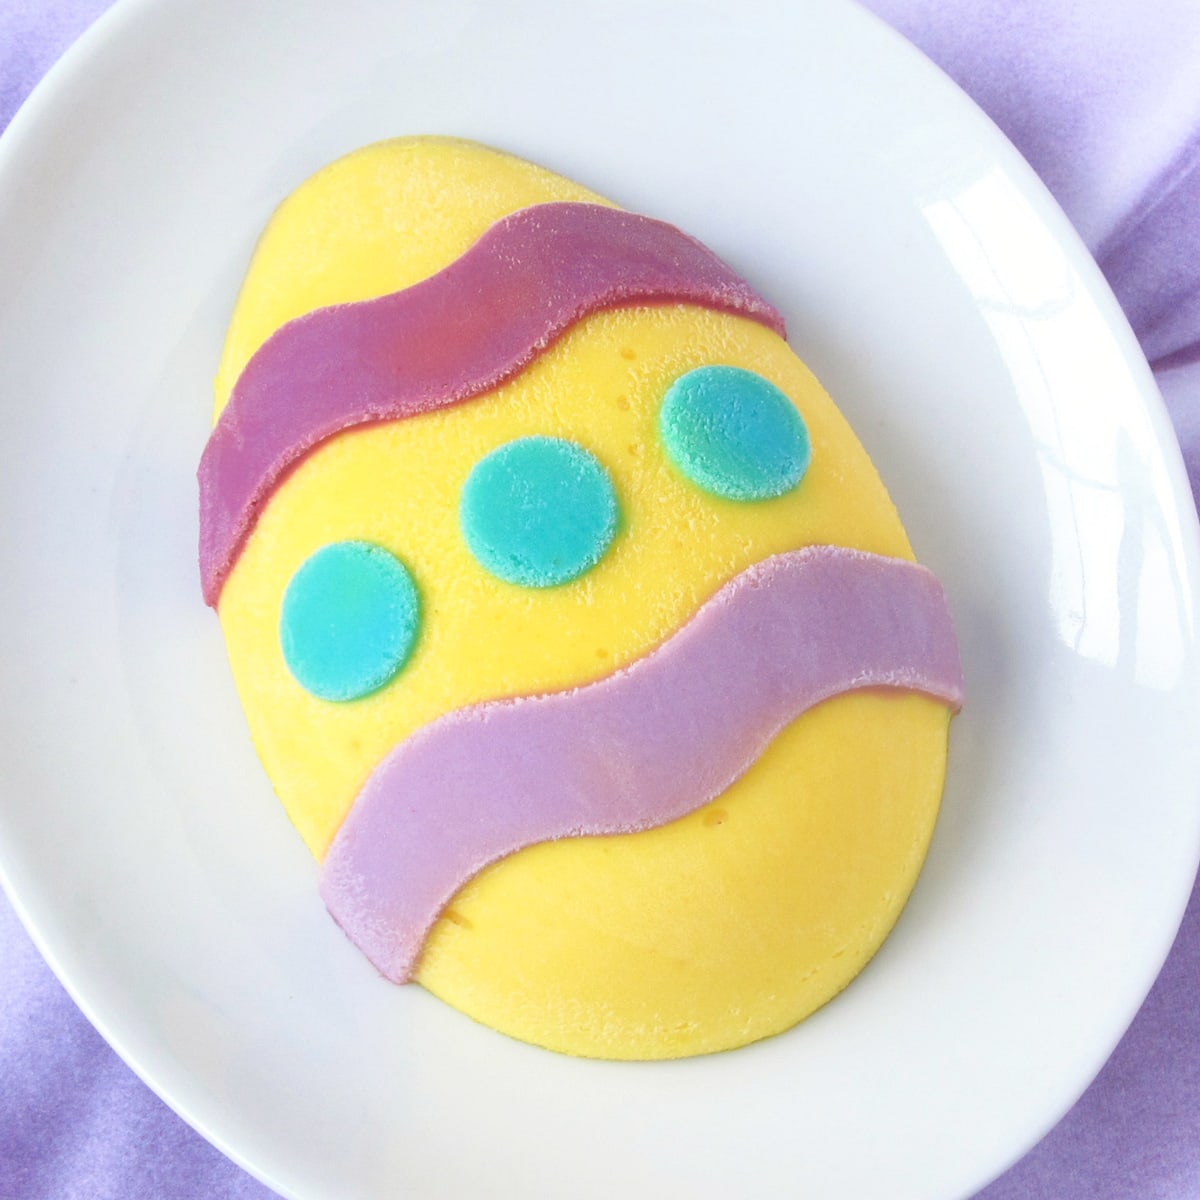 a yellow hand-painted cheesecake Easter egg with purple wavy stripes and turquoise polka dots served on a white dish on a piece of lavender satin.